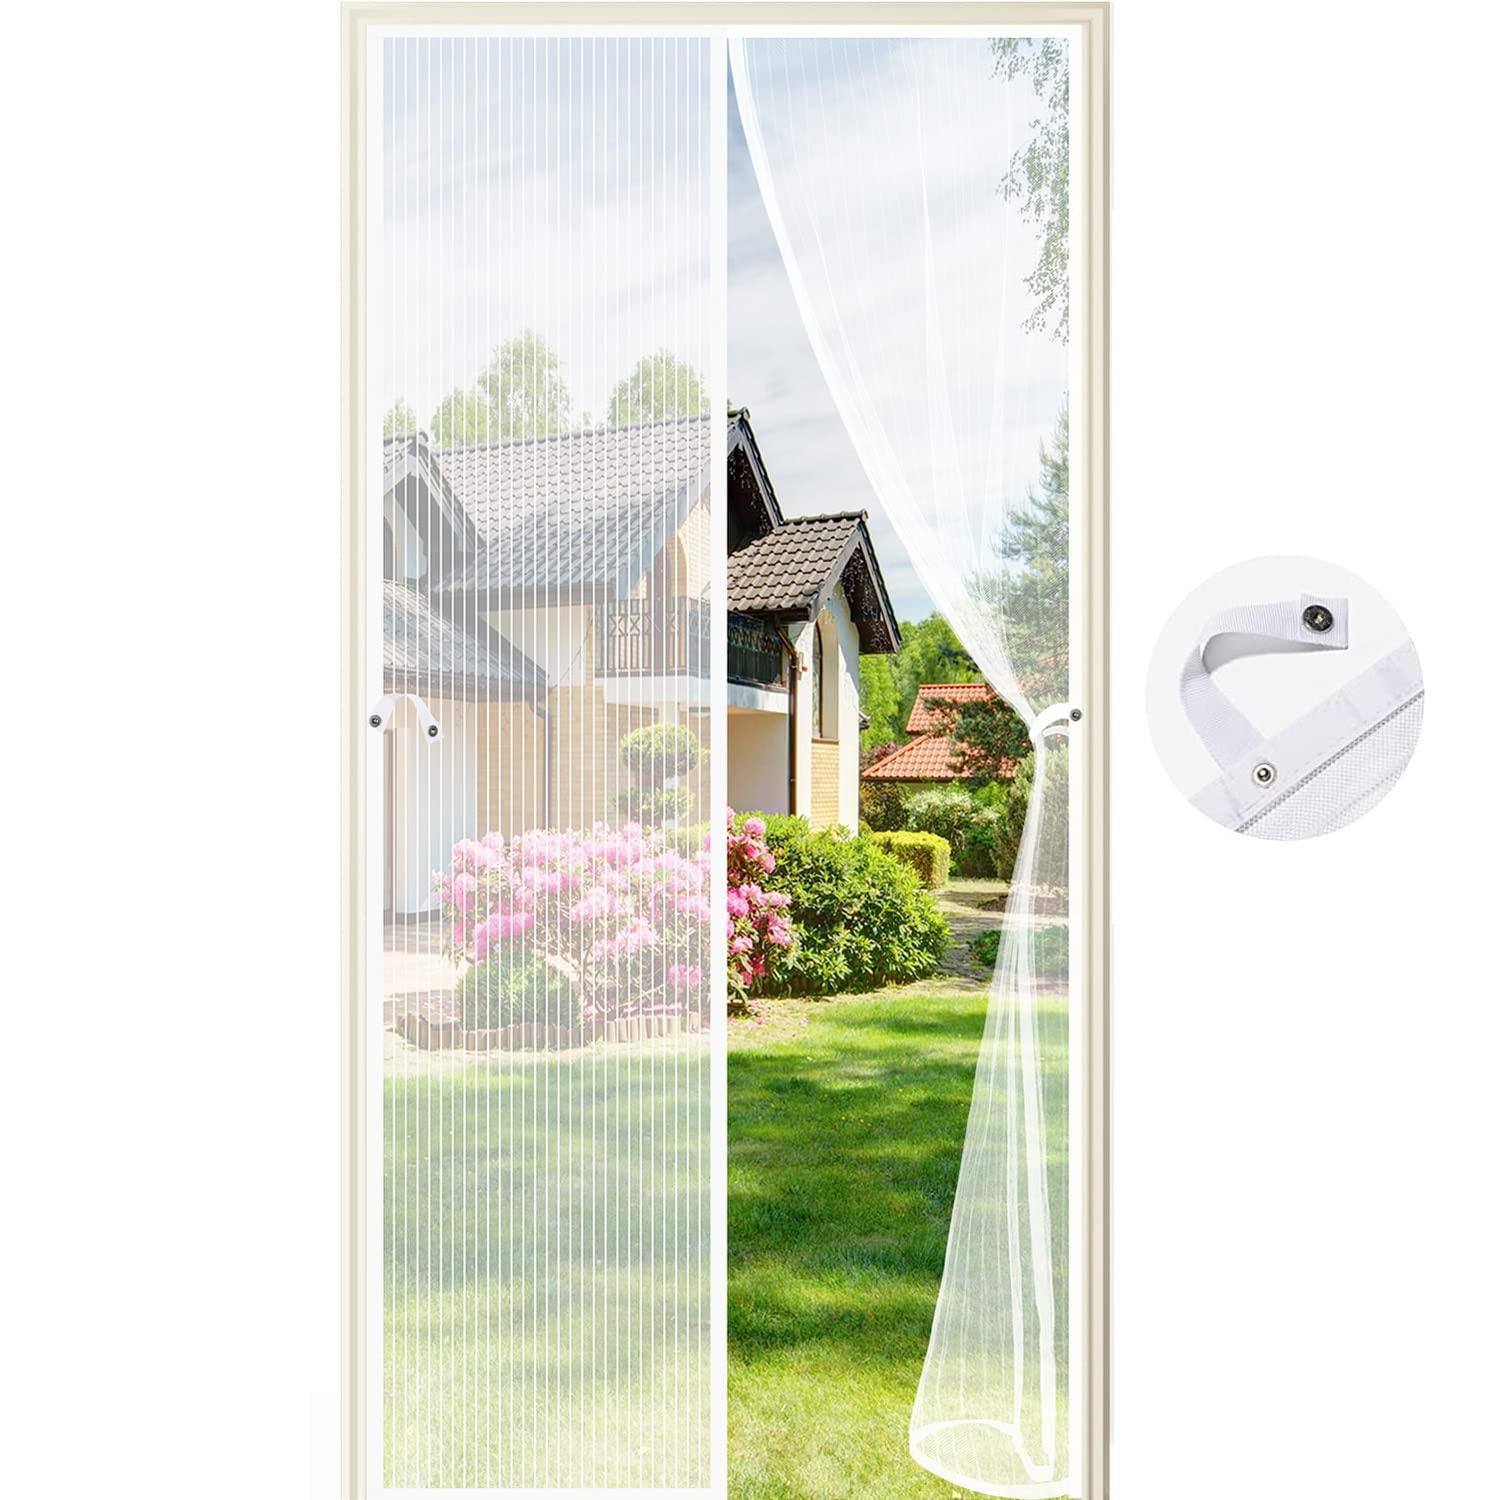 AOXOI Magnetic Fly Screen Door, Door Nets with Magnets Anti Mosquito Mesh Curtain Keep Insects Out&Fresh Air in No Drilling Hands Free with Snap Fastener for Balcony Patio Doors(90*210CM White)